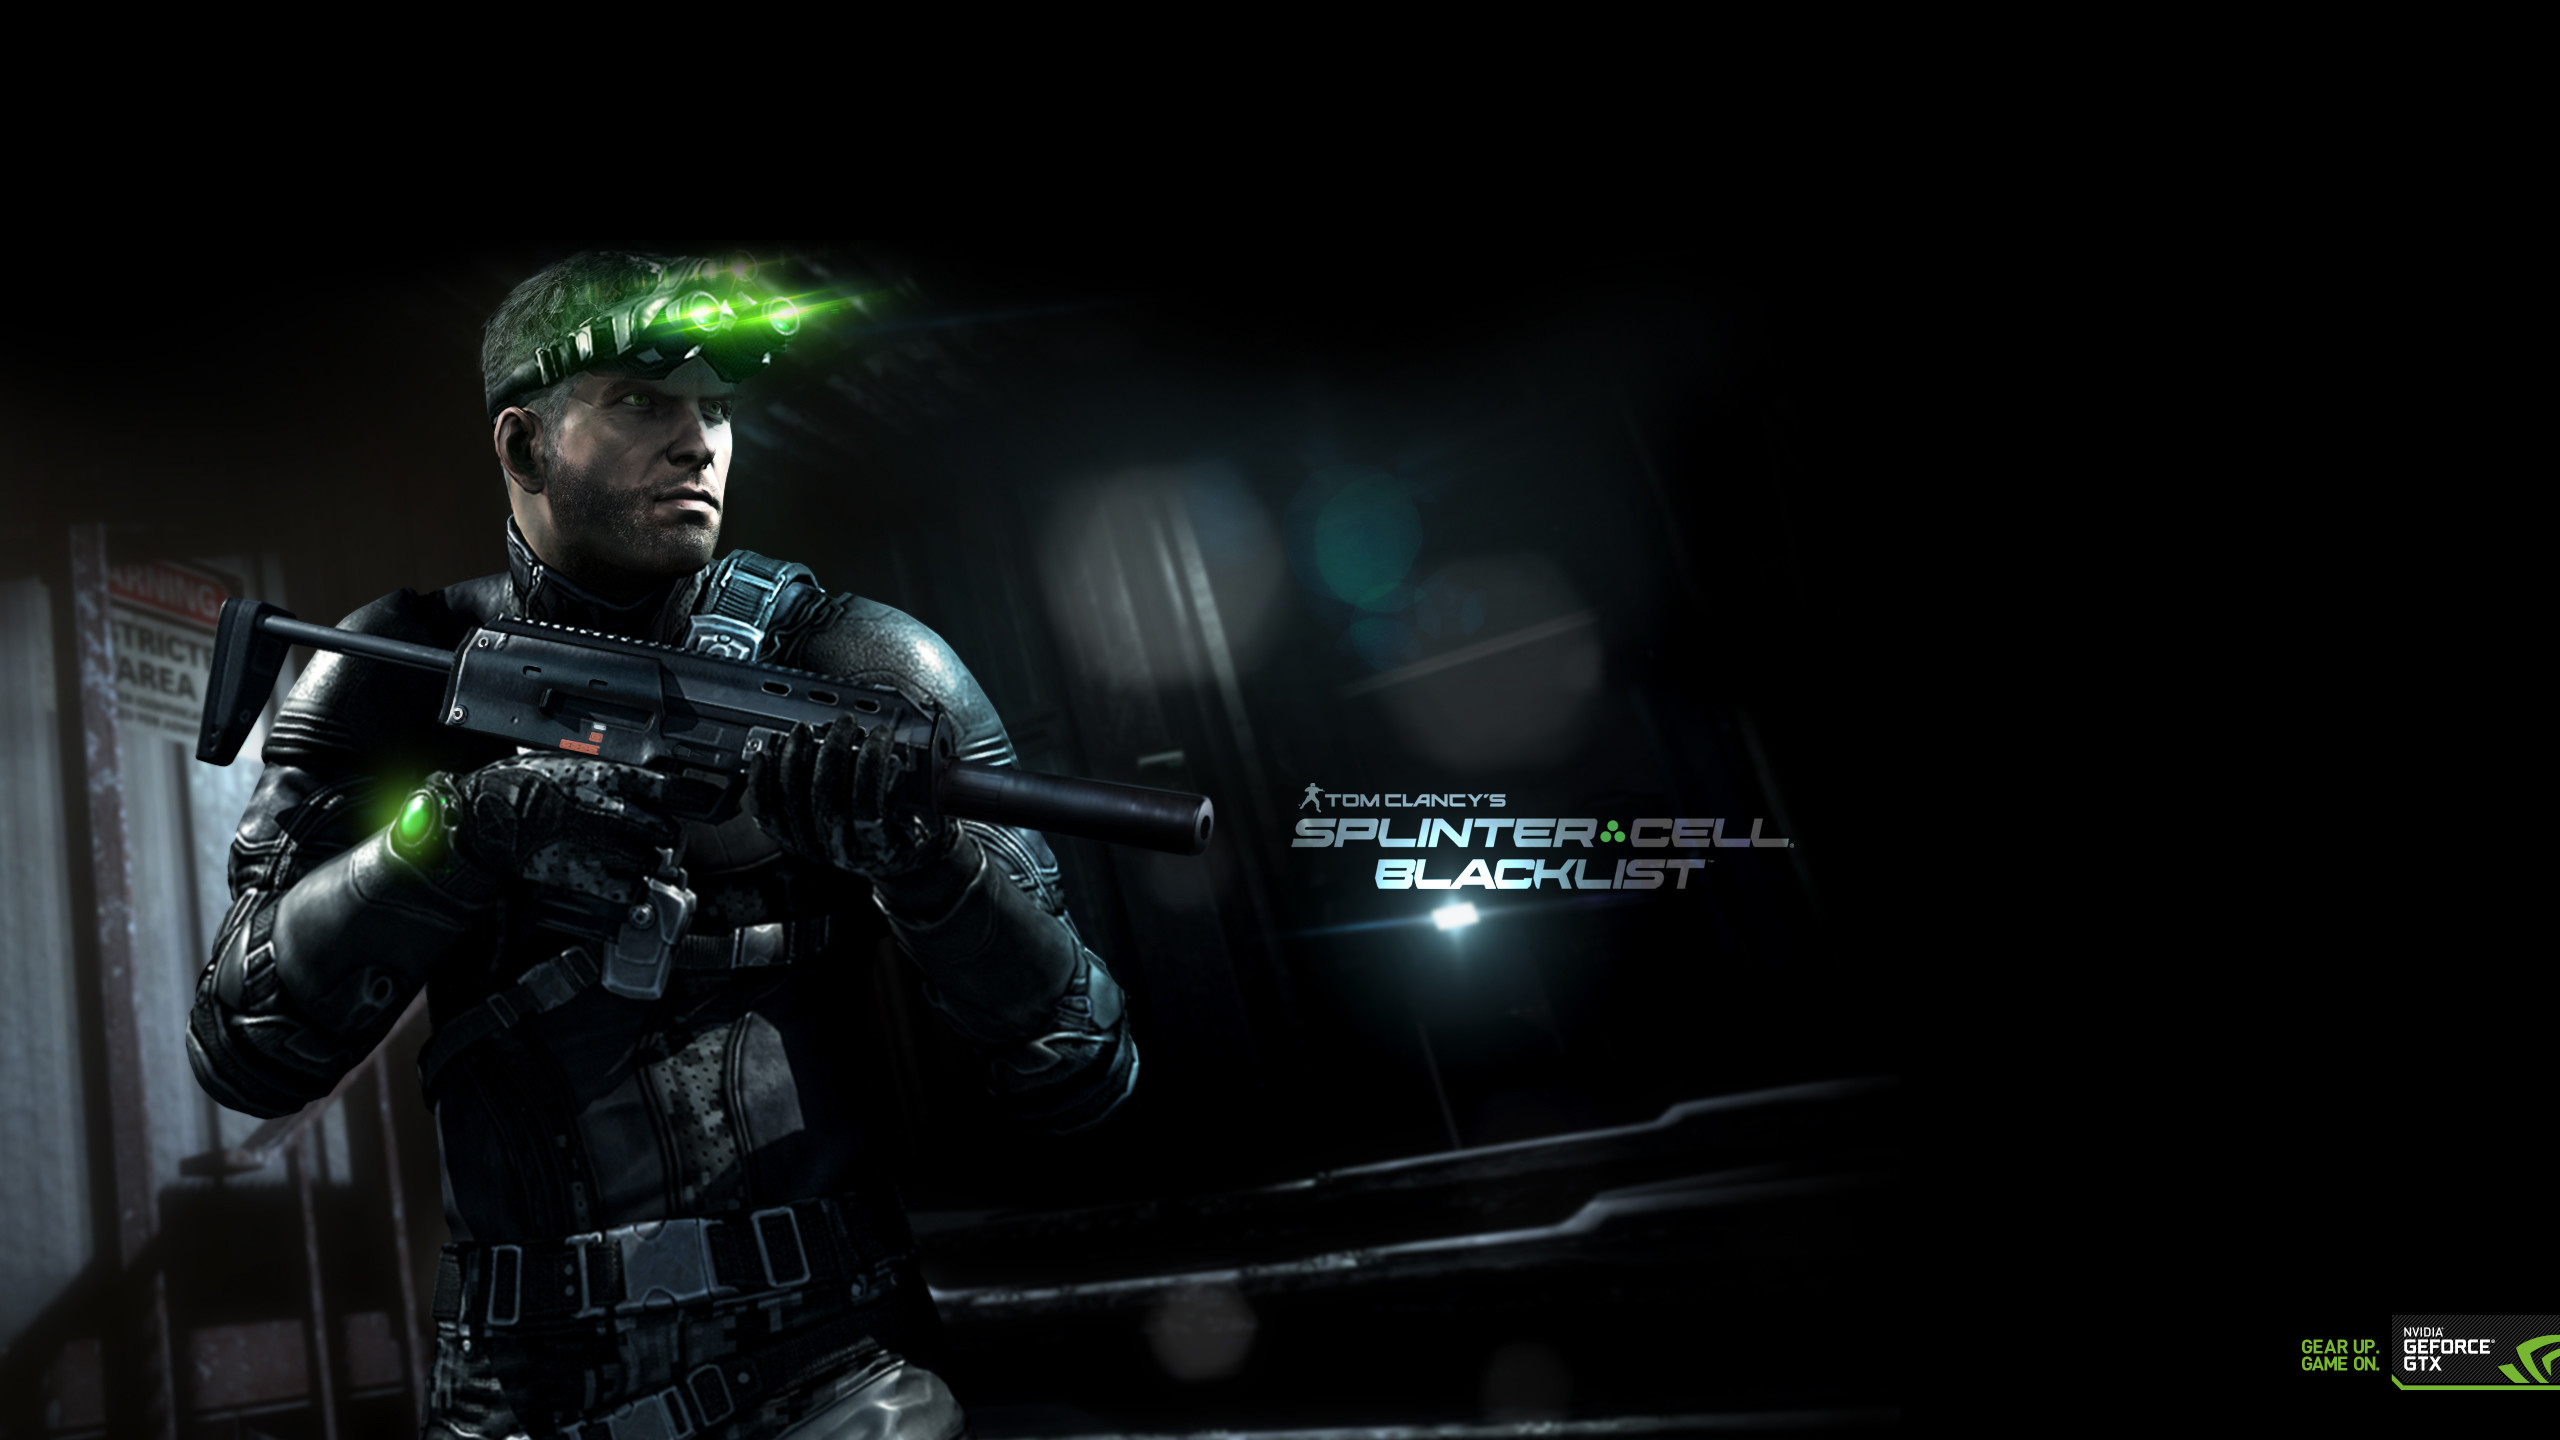 2560x1440 Round 2: Second Set of GeForce Exclusive Tom Clancy's Splinter Cell  Blacklist Wallpaper Now Available